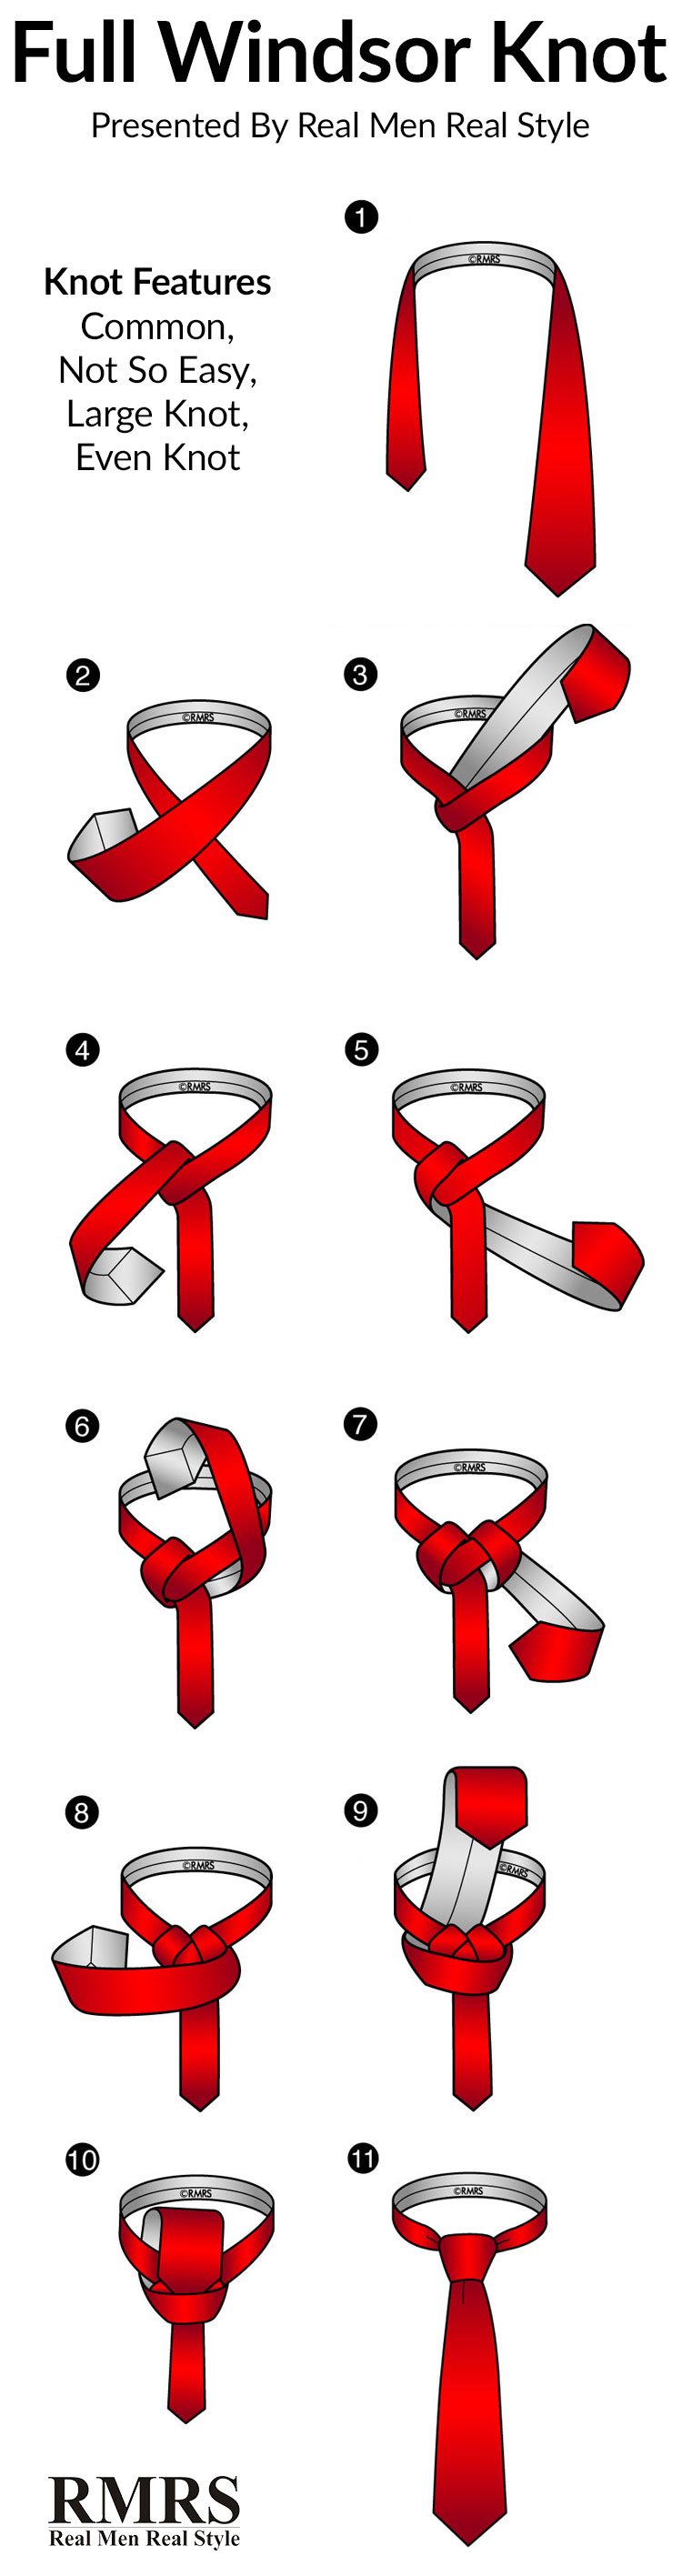 How To Tie A Full Windsor Knot Infographic